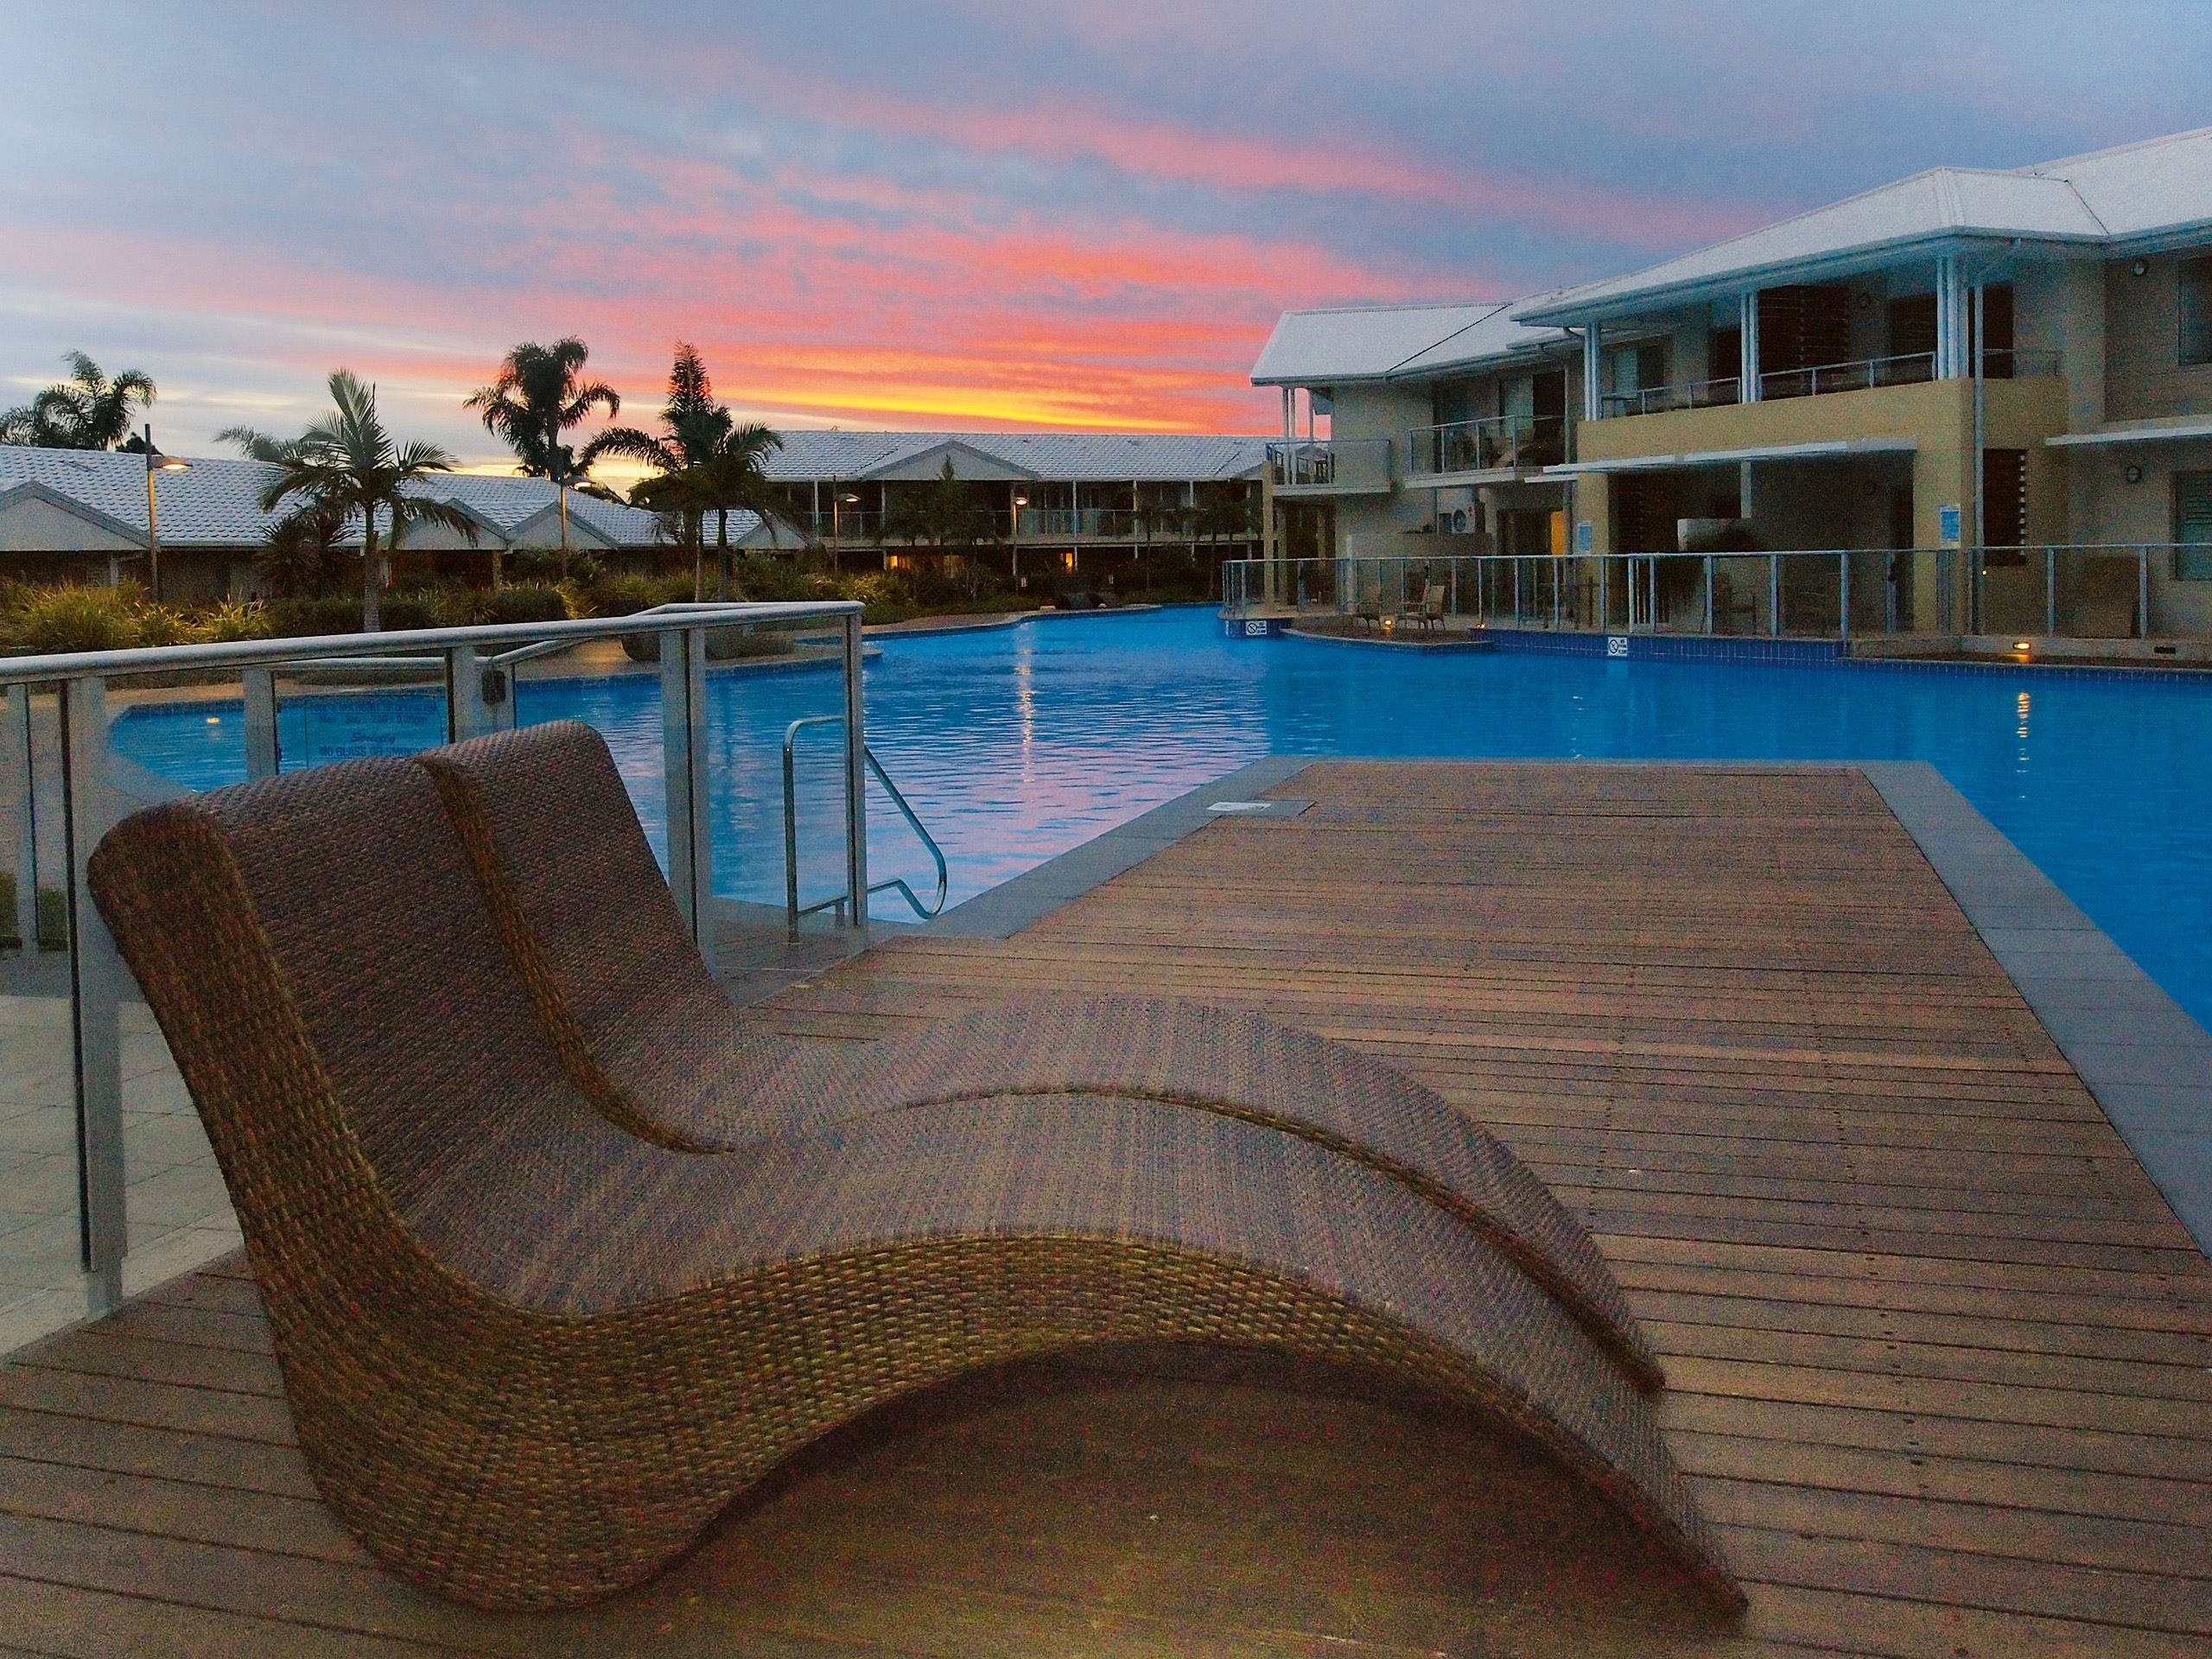 Oaks Port Stephens Pacific Blue Resort - Accommodation in Surfers Paradise